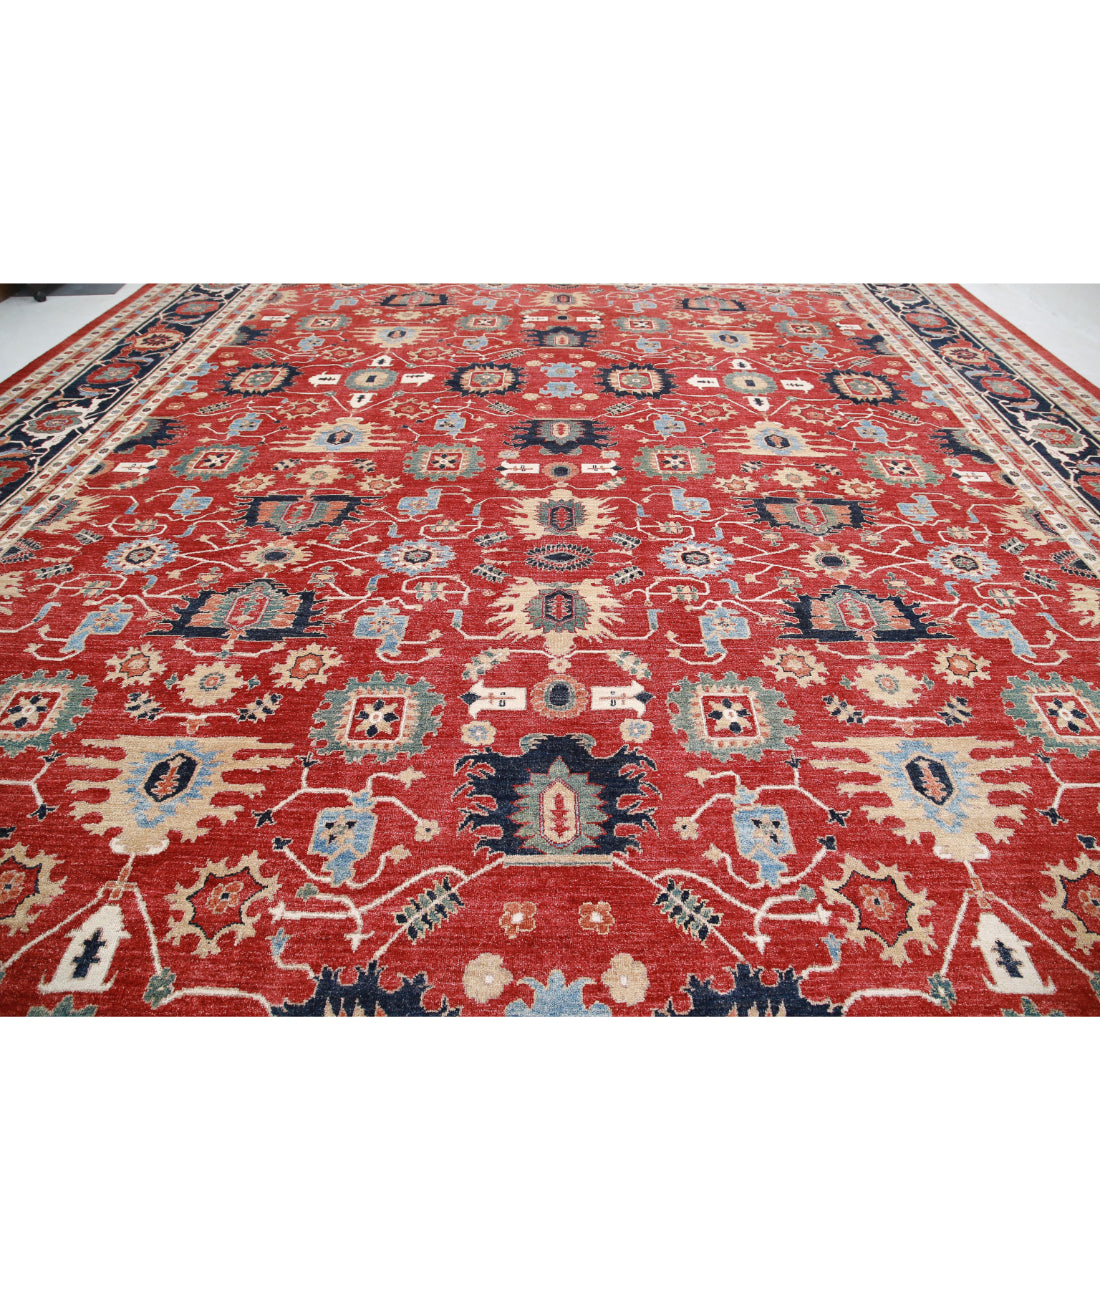 Heriz 17'8'' X 25'9'' Hand-Knotted Wool Rug 17'8'' x 25'9'' (530 X 773) / Red / Blue